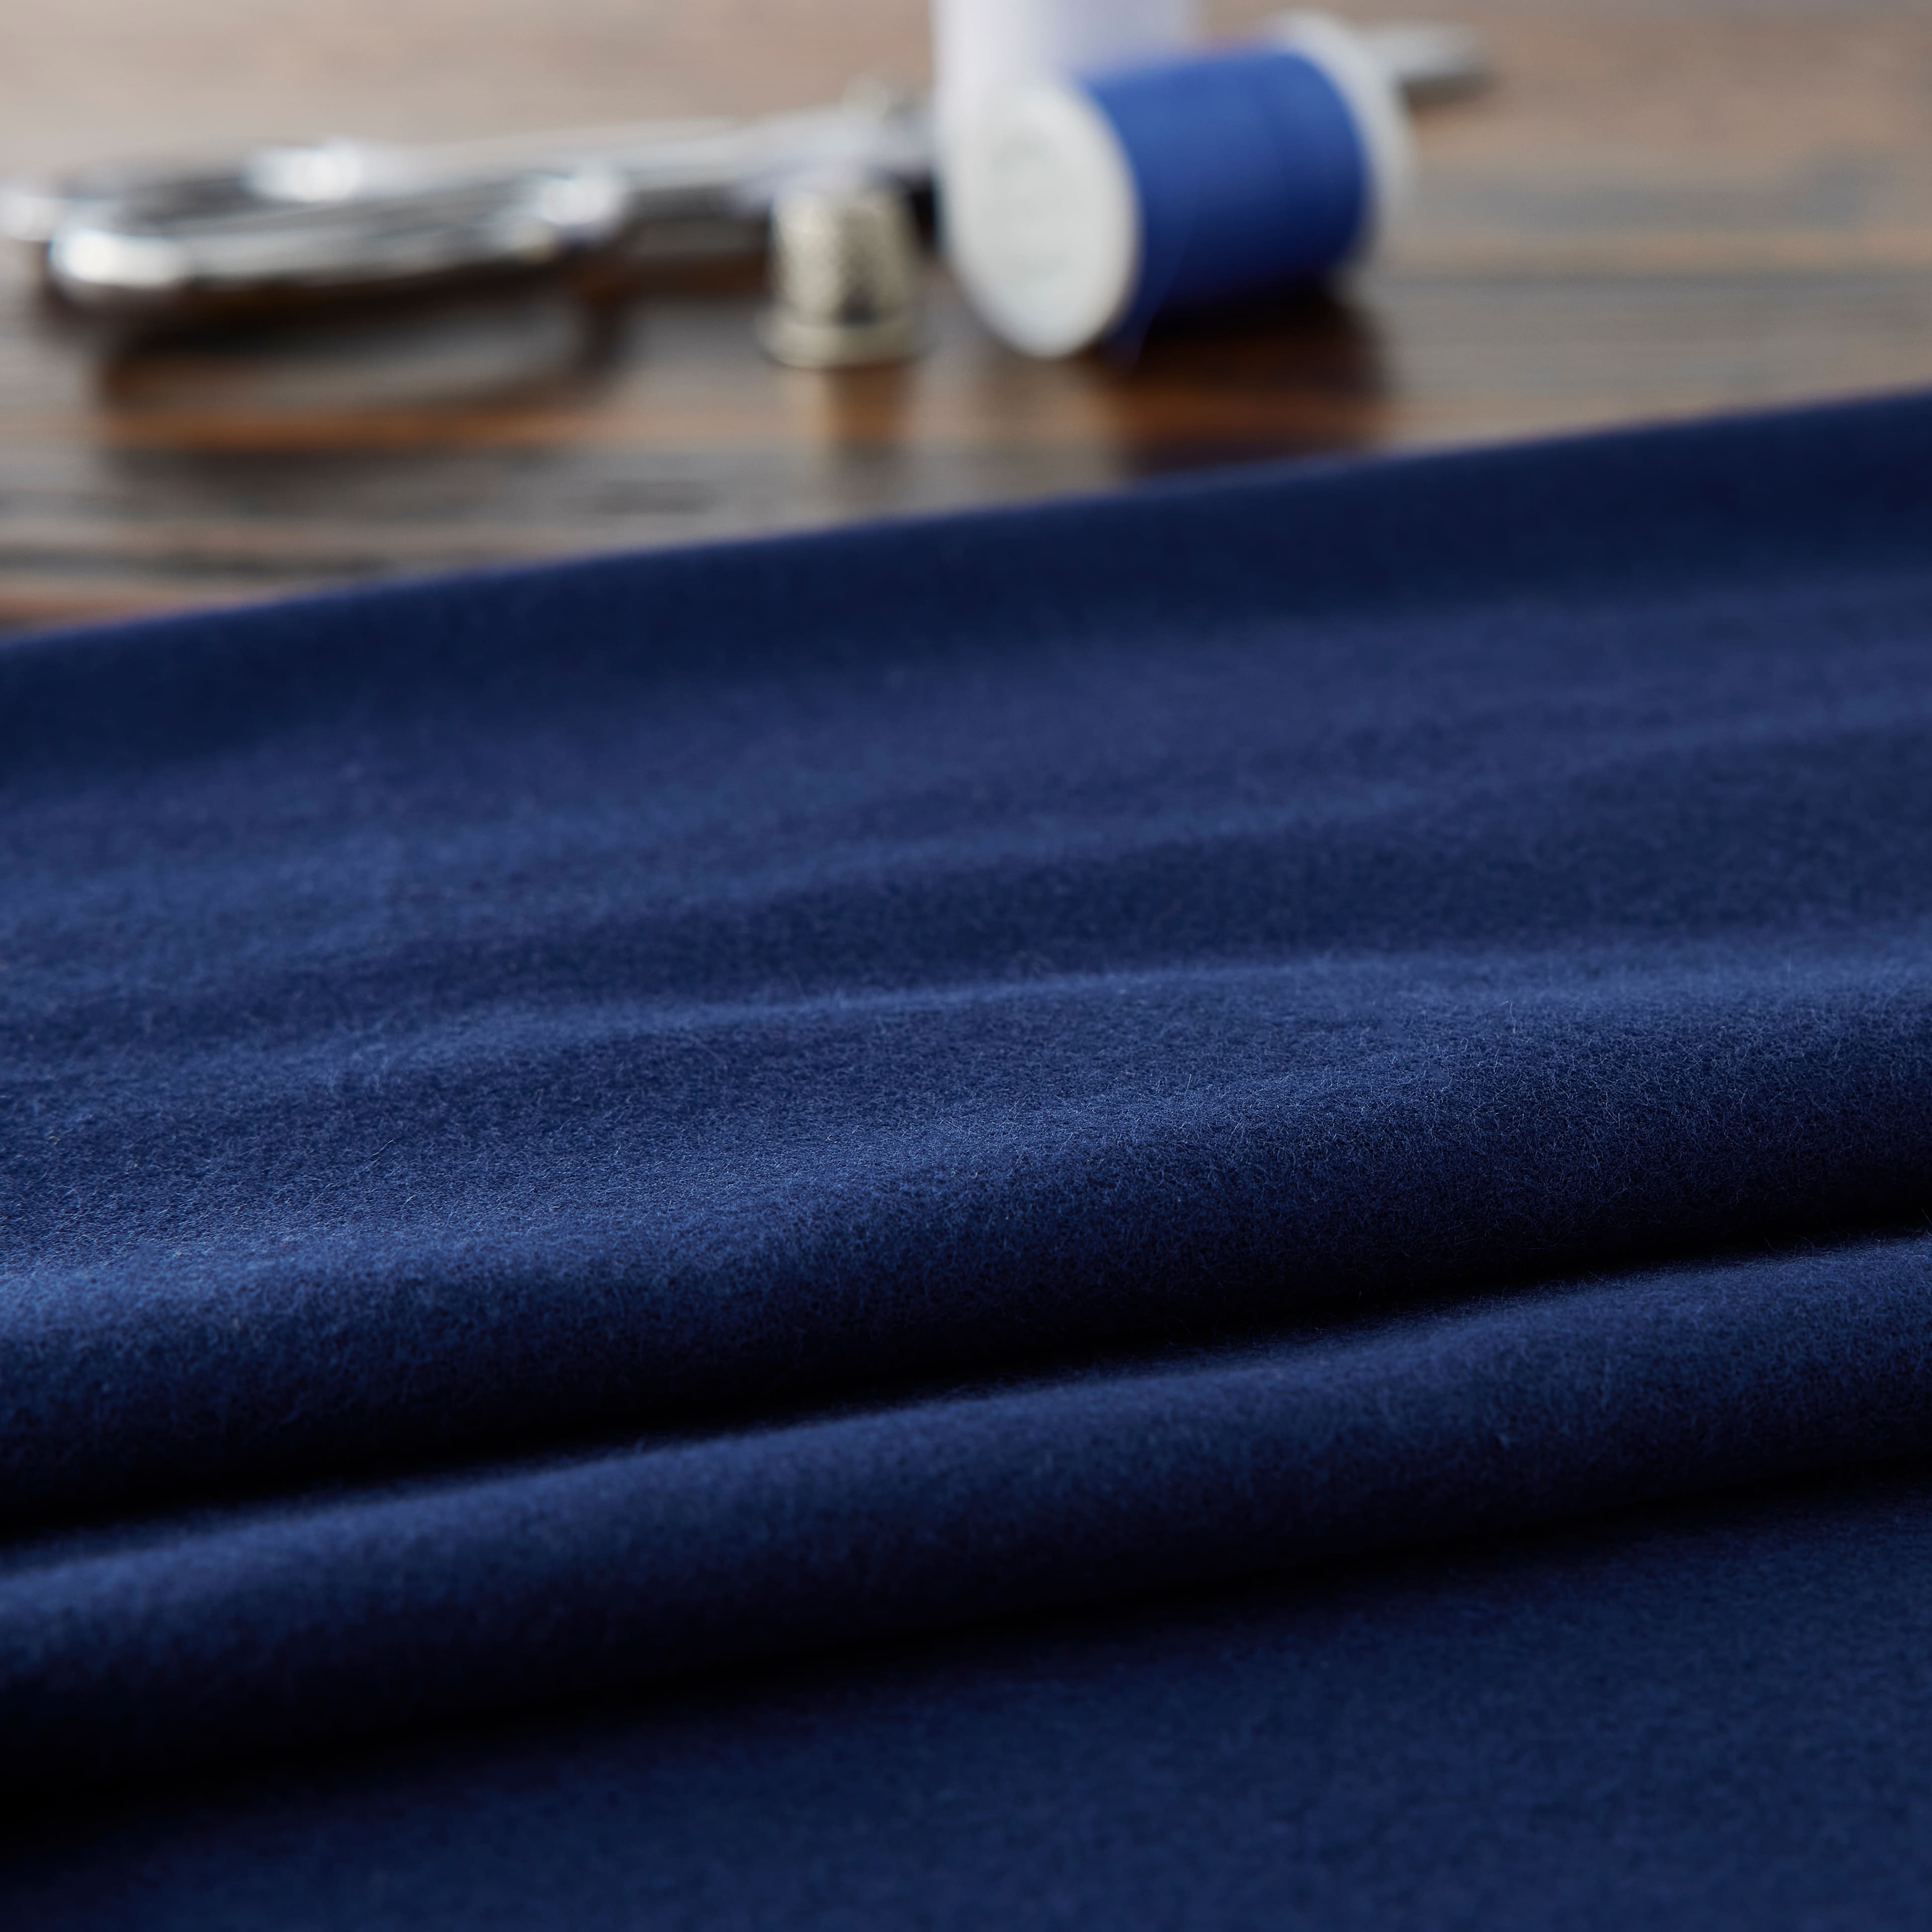 Navy Solid Cotton Flannel